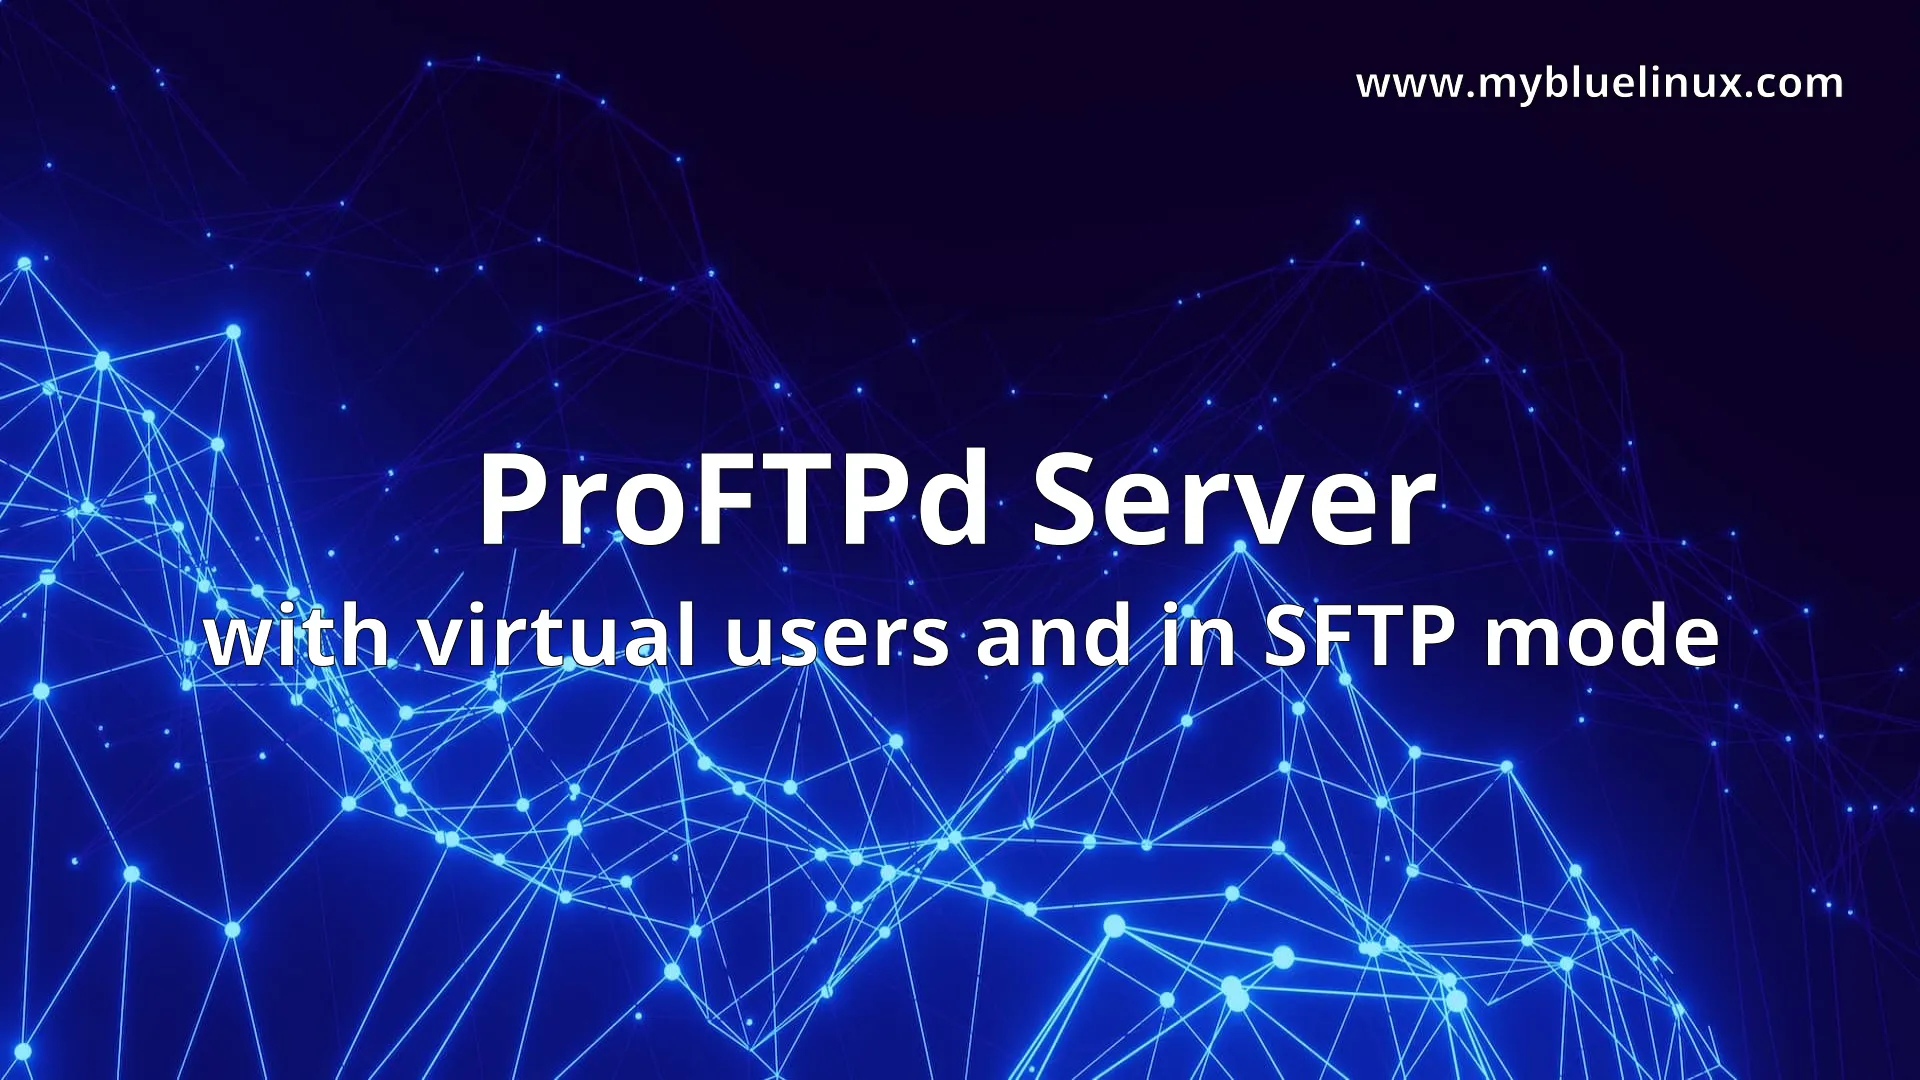 ProFTPd Server with virtual users and in SFTP mode